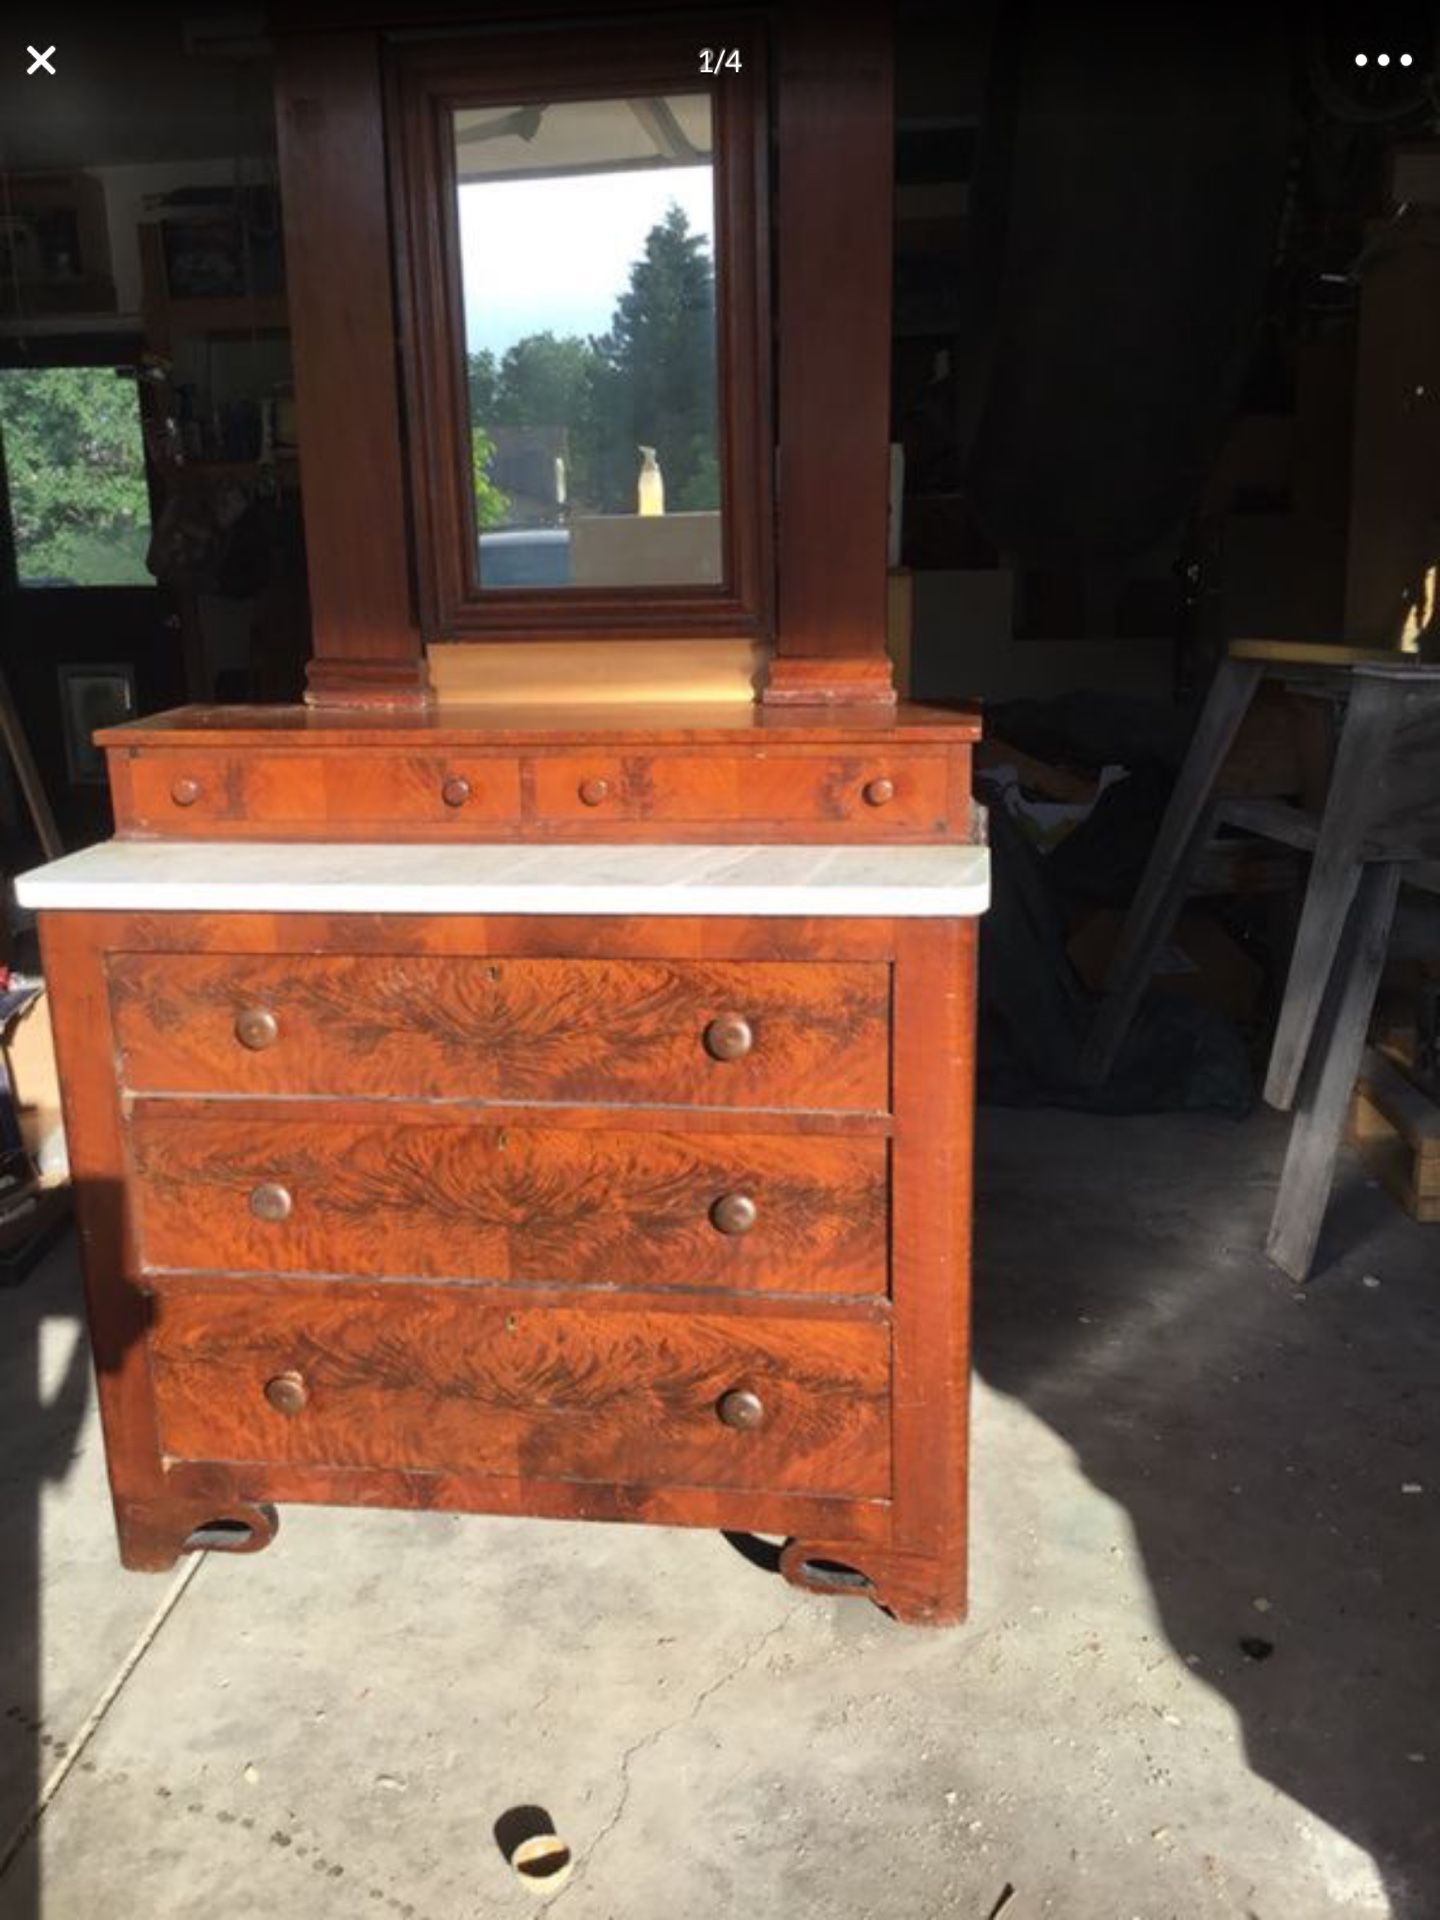 Antique dresser from 1800’s beautiful marble top dresser with mirror